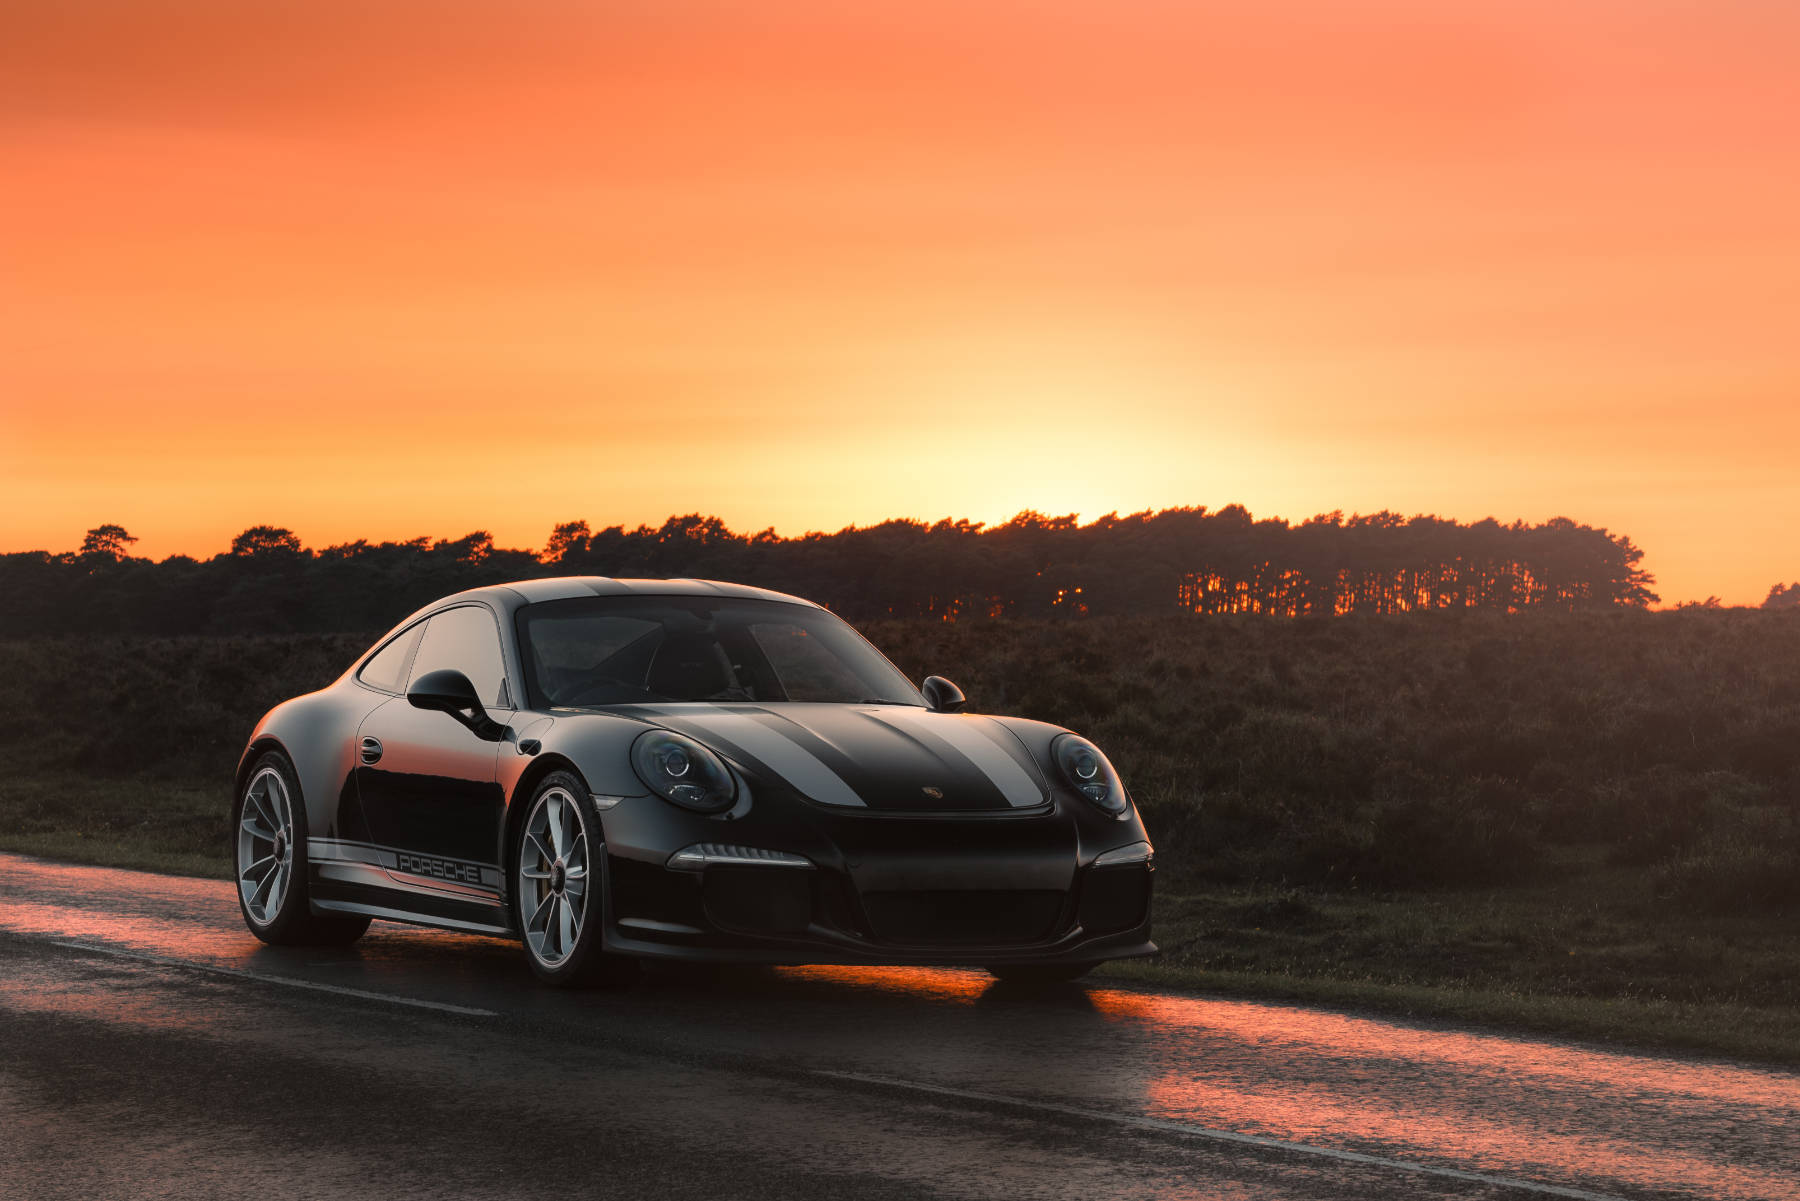 Black Porsche with racing stripes in the sunset